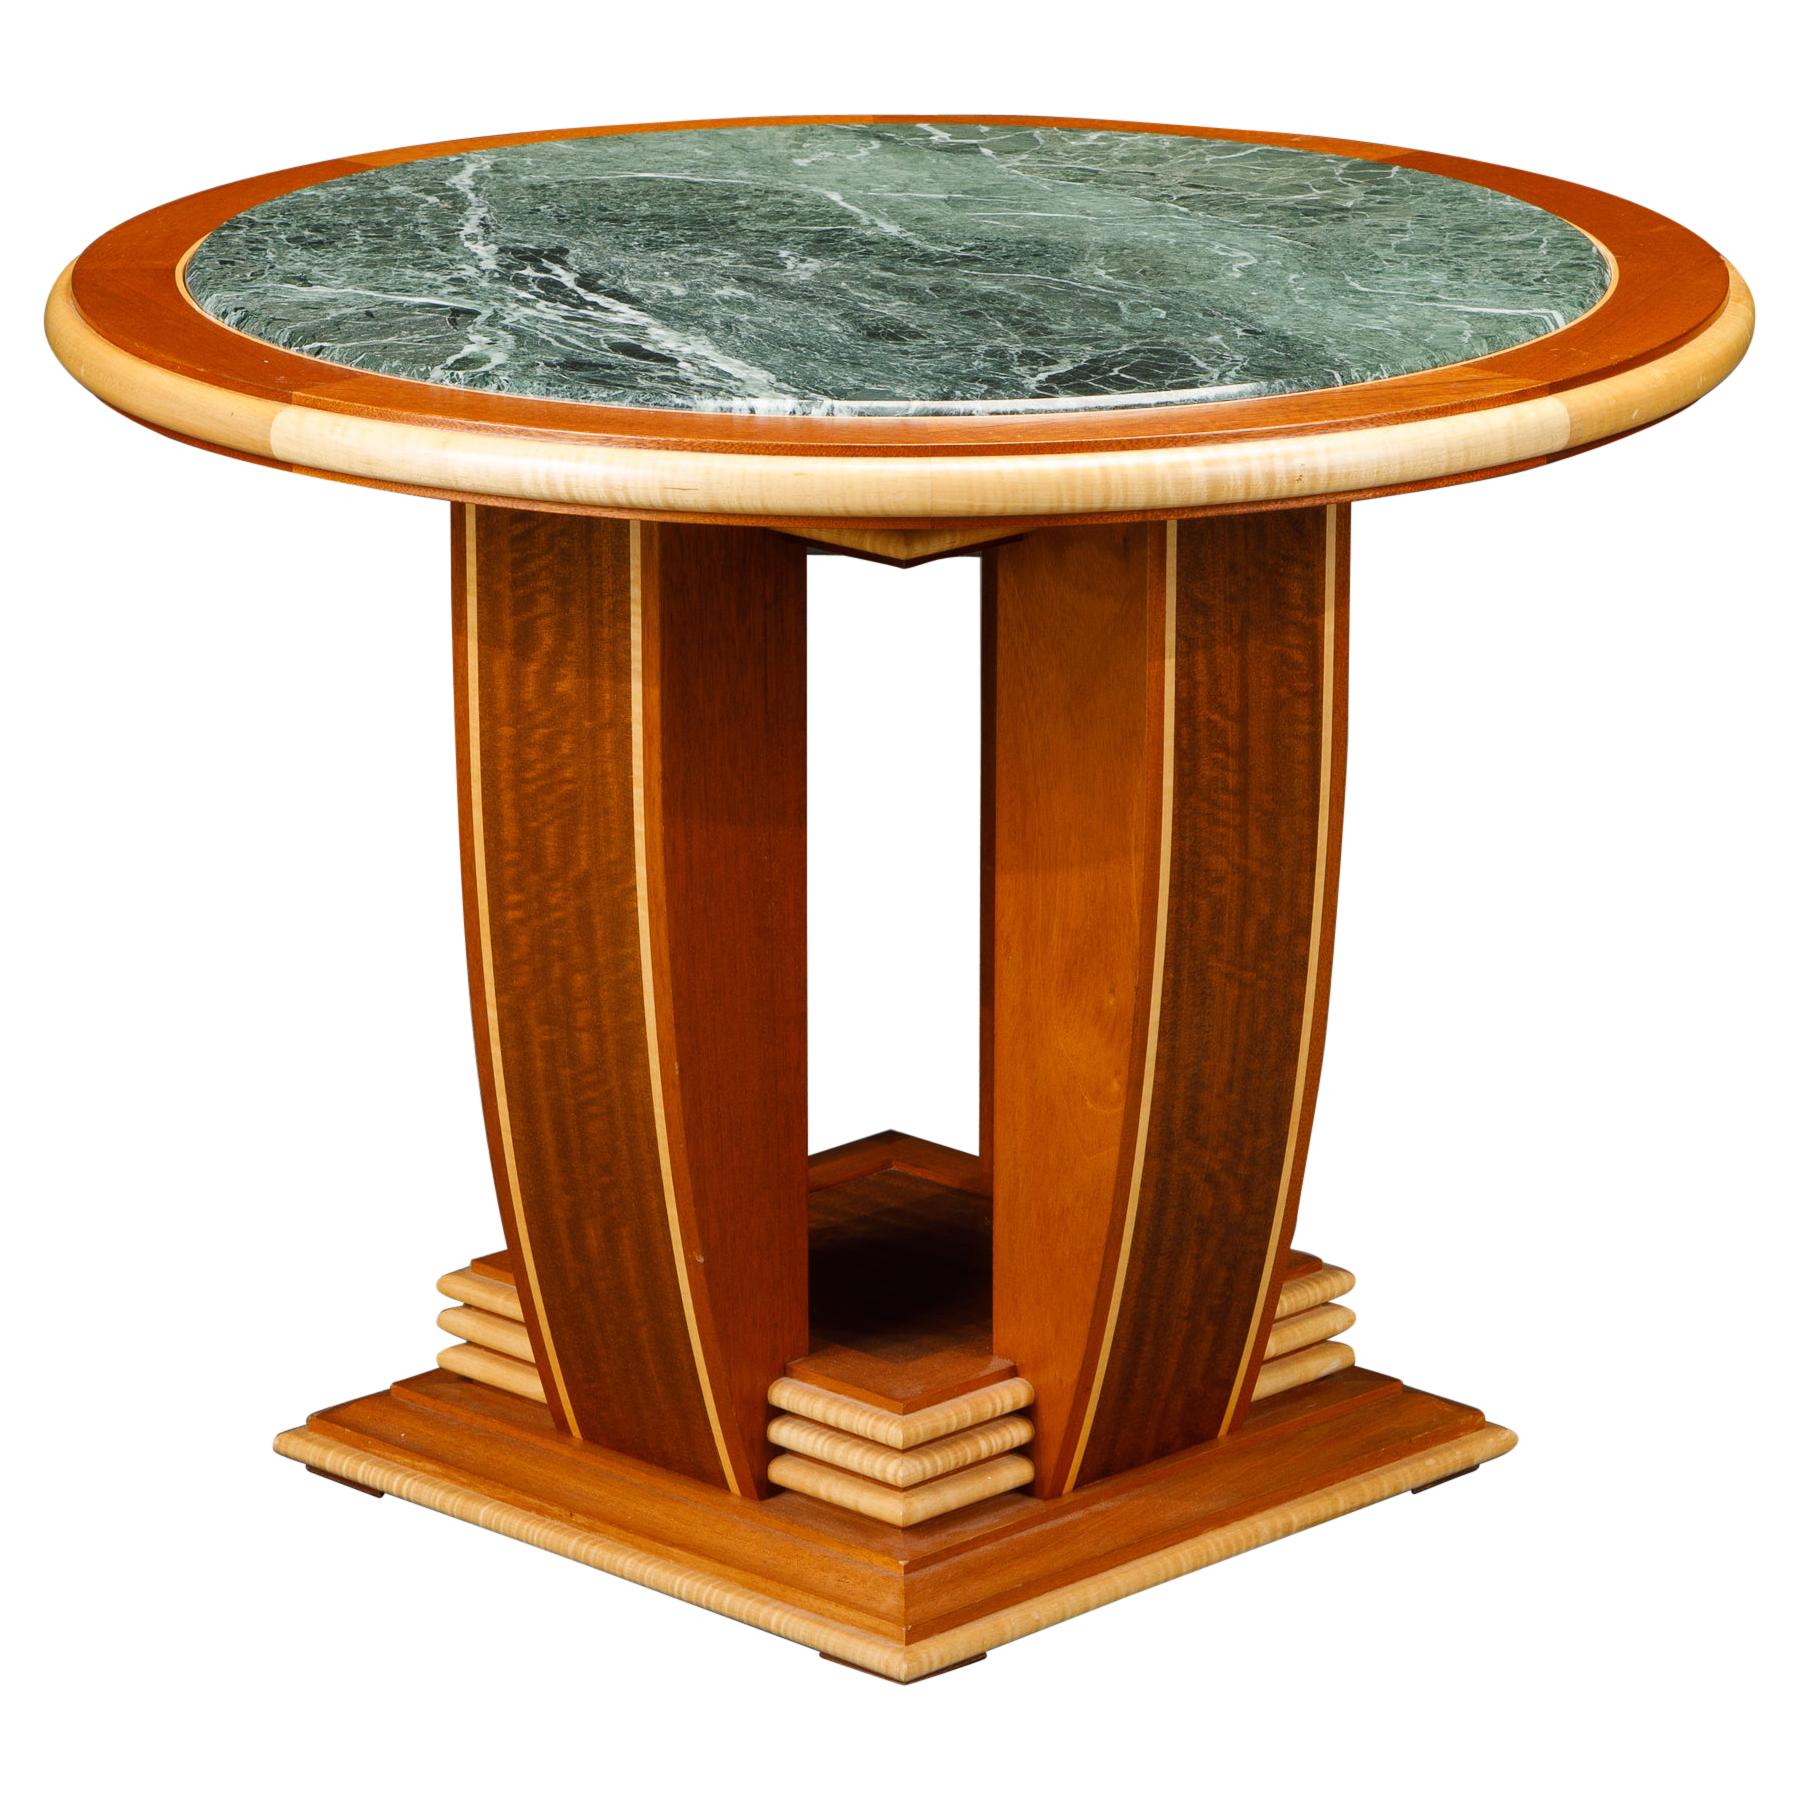 Mahogany, Maple and Marble Center Table or Tea Table by Ron Puckett